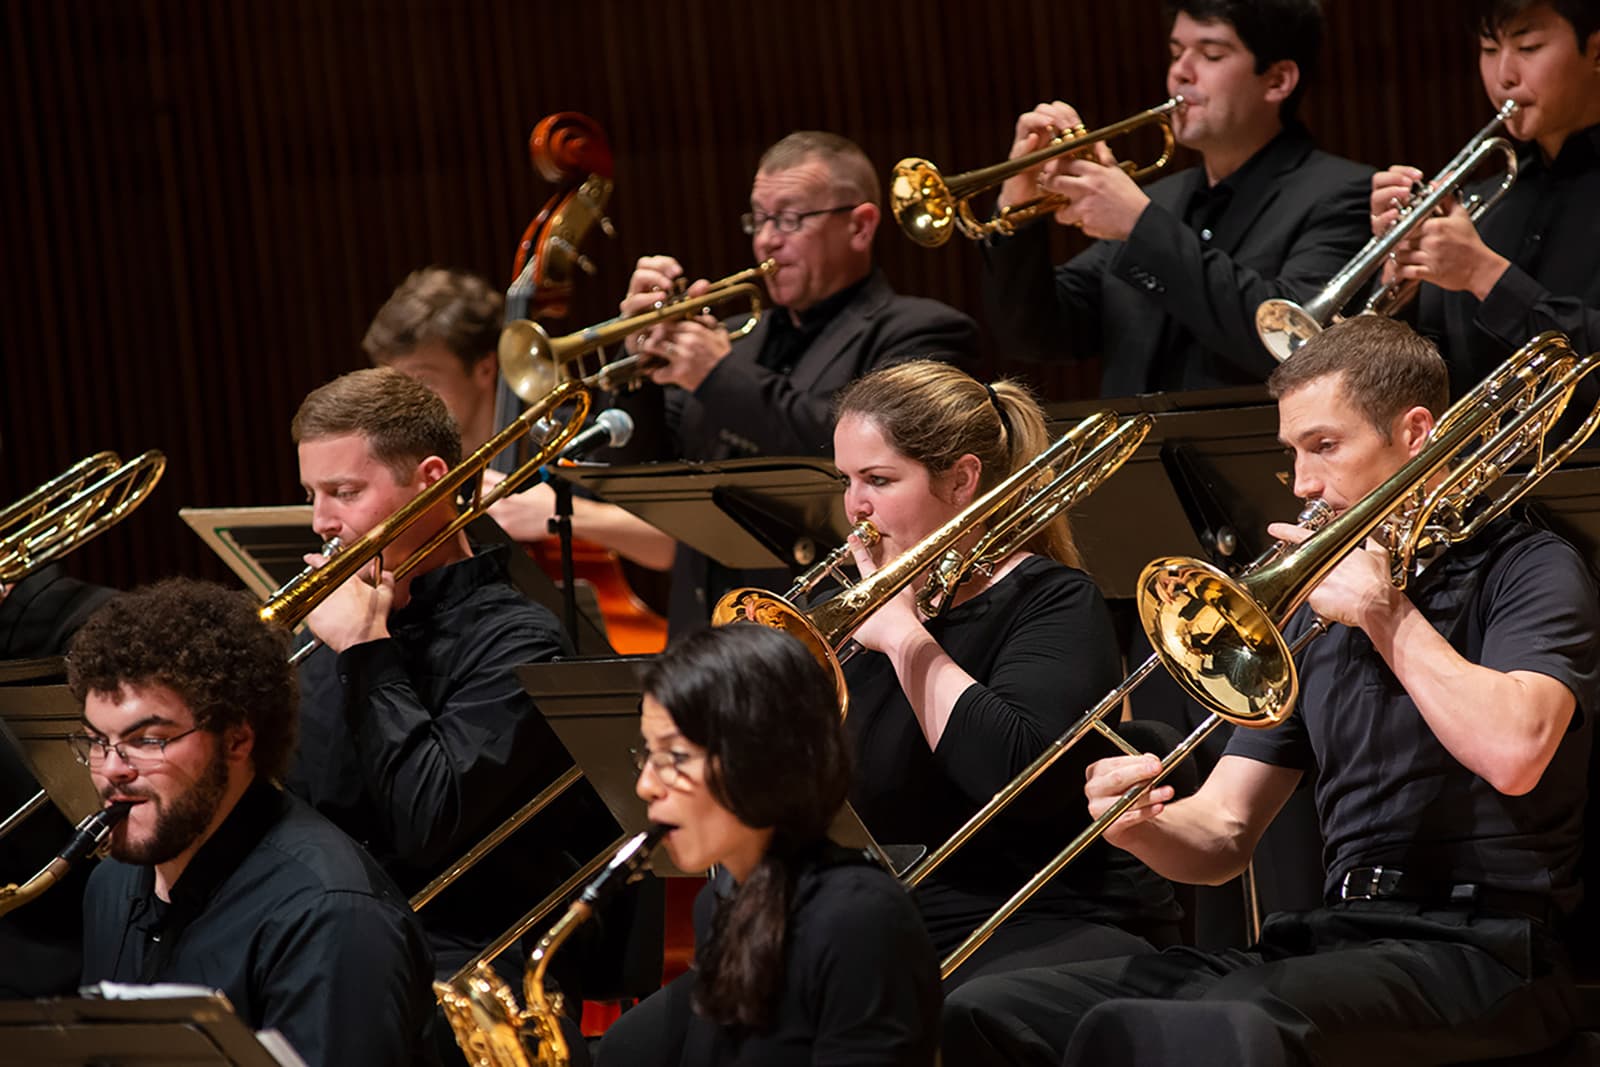 Students play trombones during a performance.